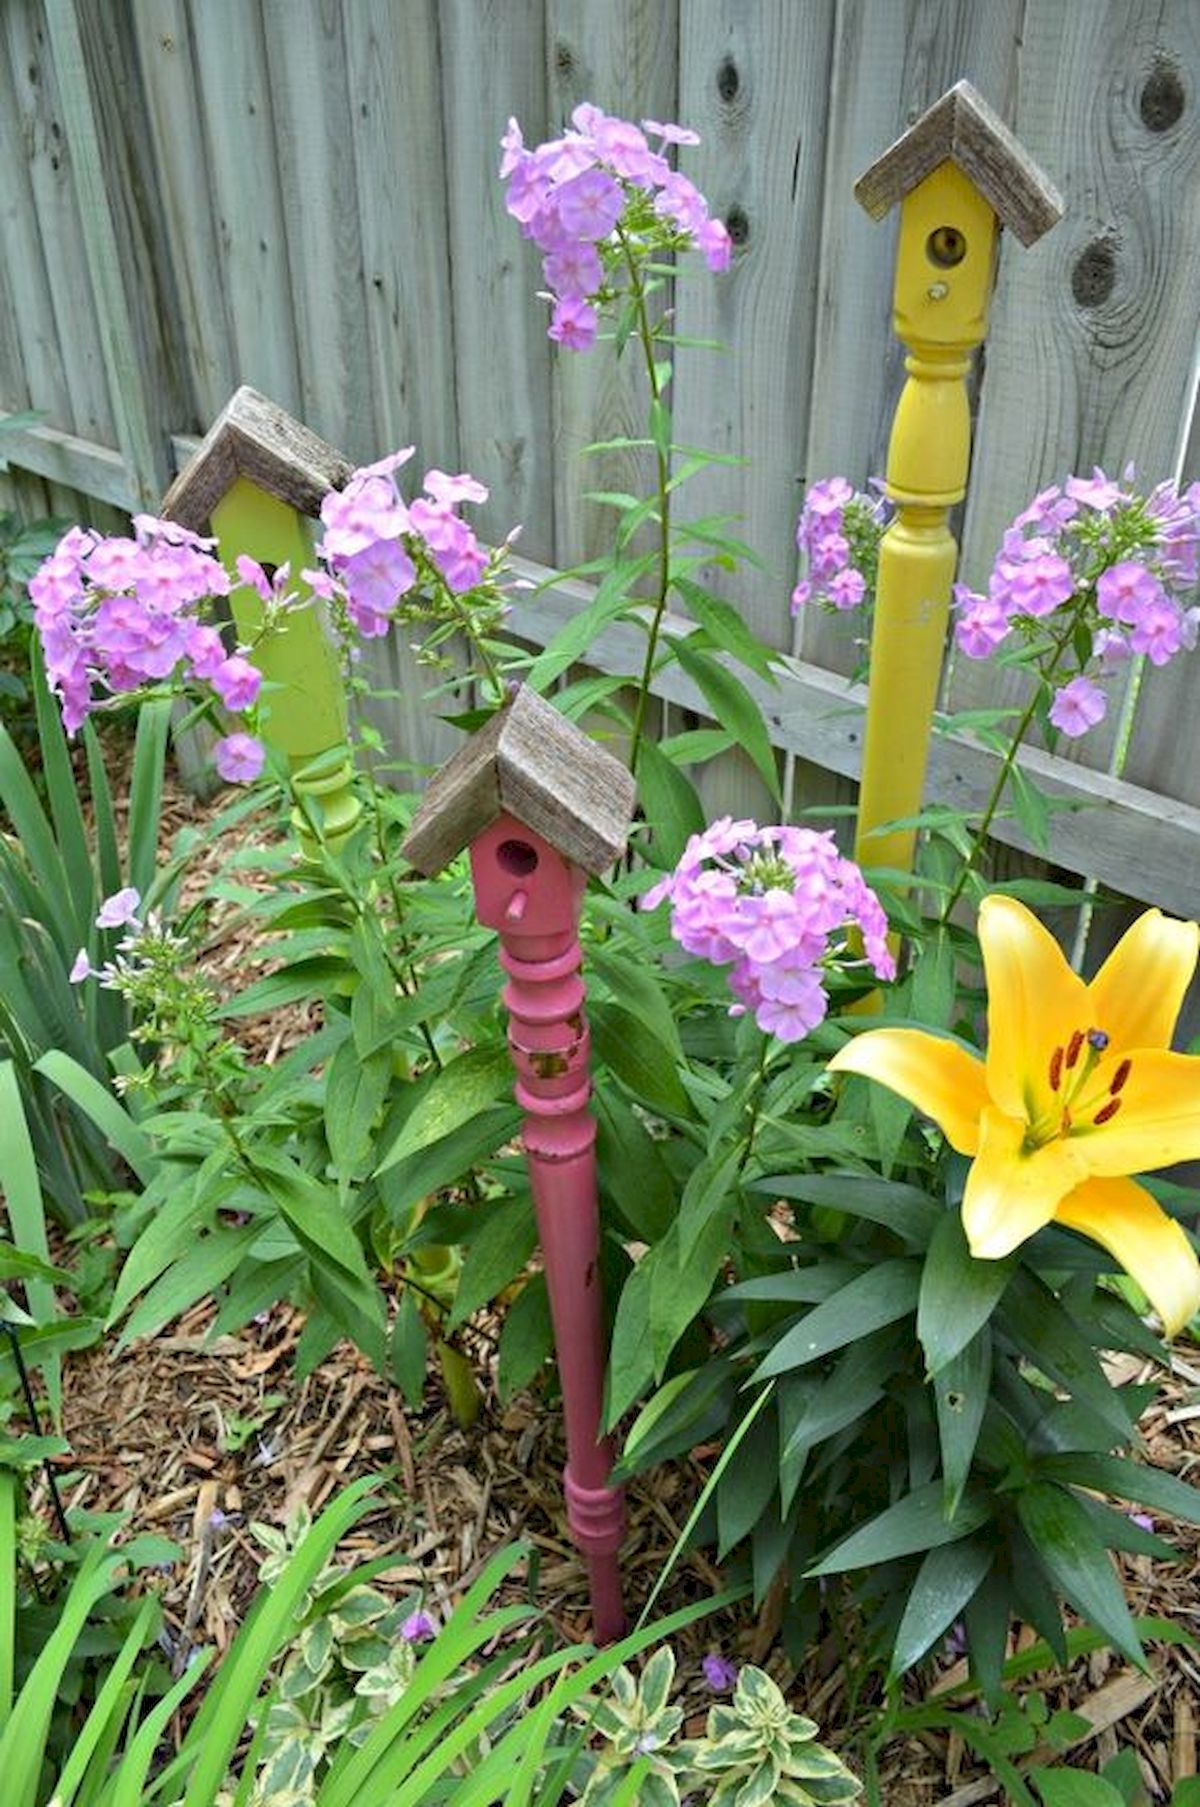 garden diy junk whimsical unique decor whimsy yard flower projects gardenideaz bed creating 1807 1200 flowers published choose board